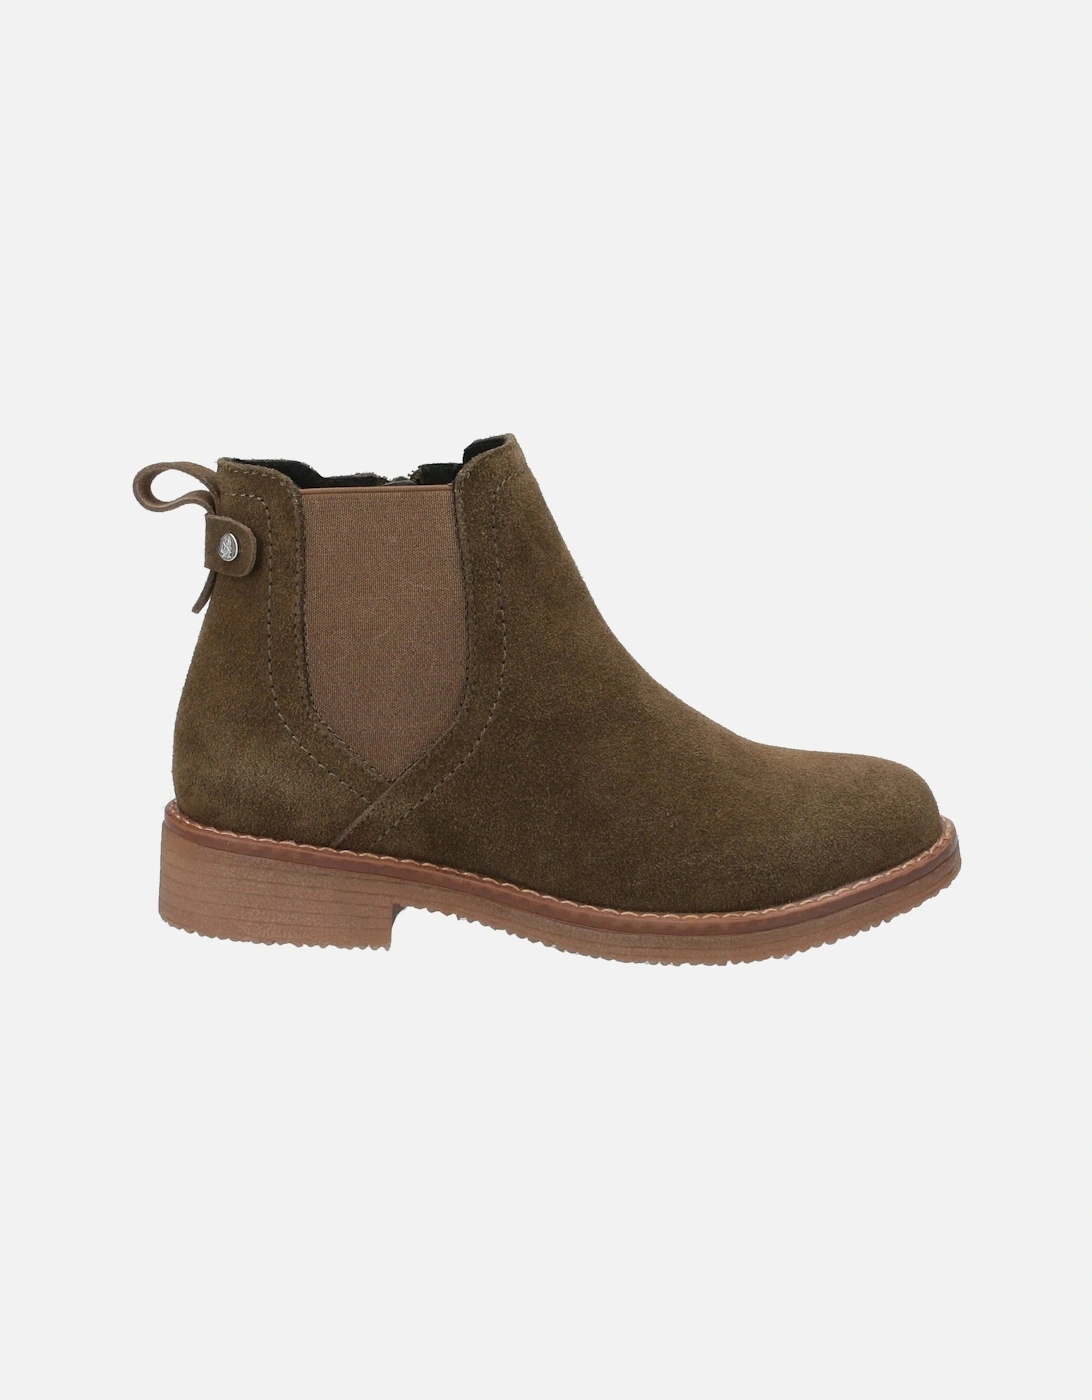 Womens/Ladies Maddy Suede Ankle Boots